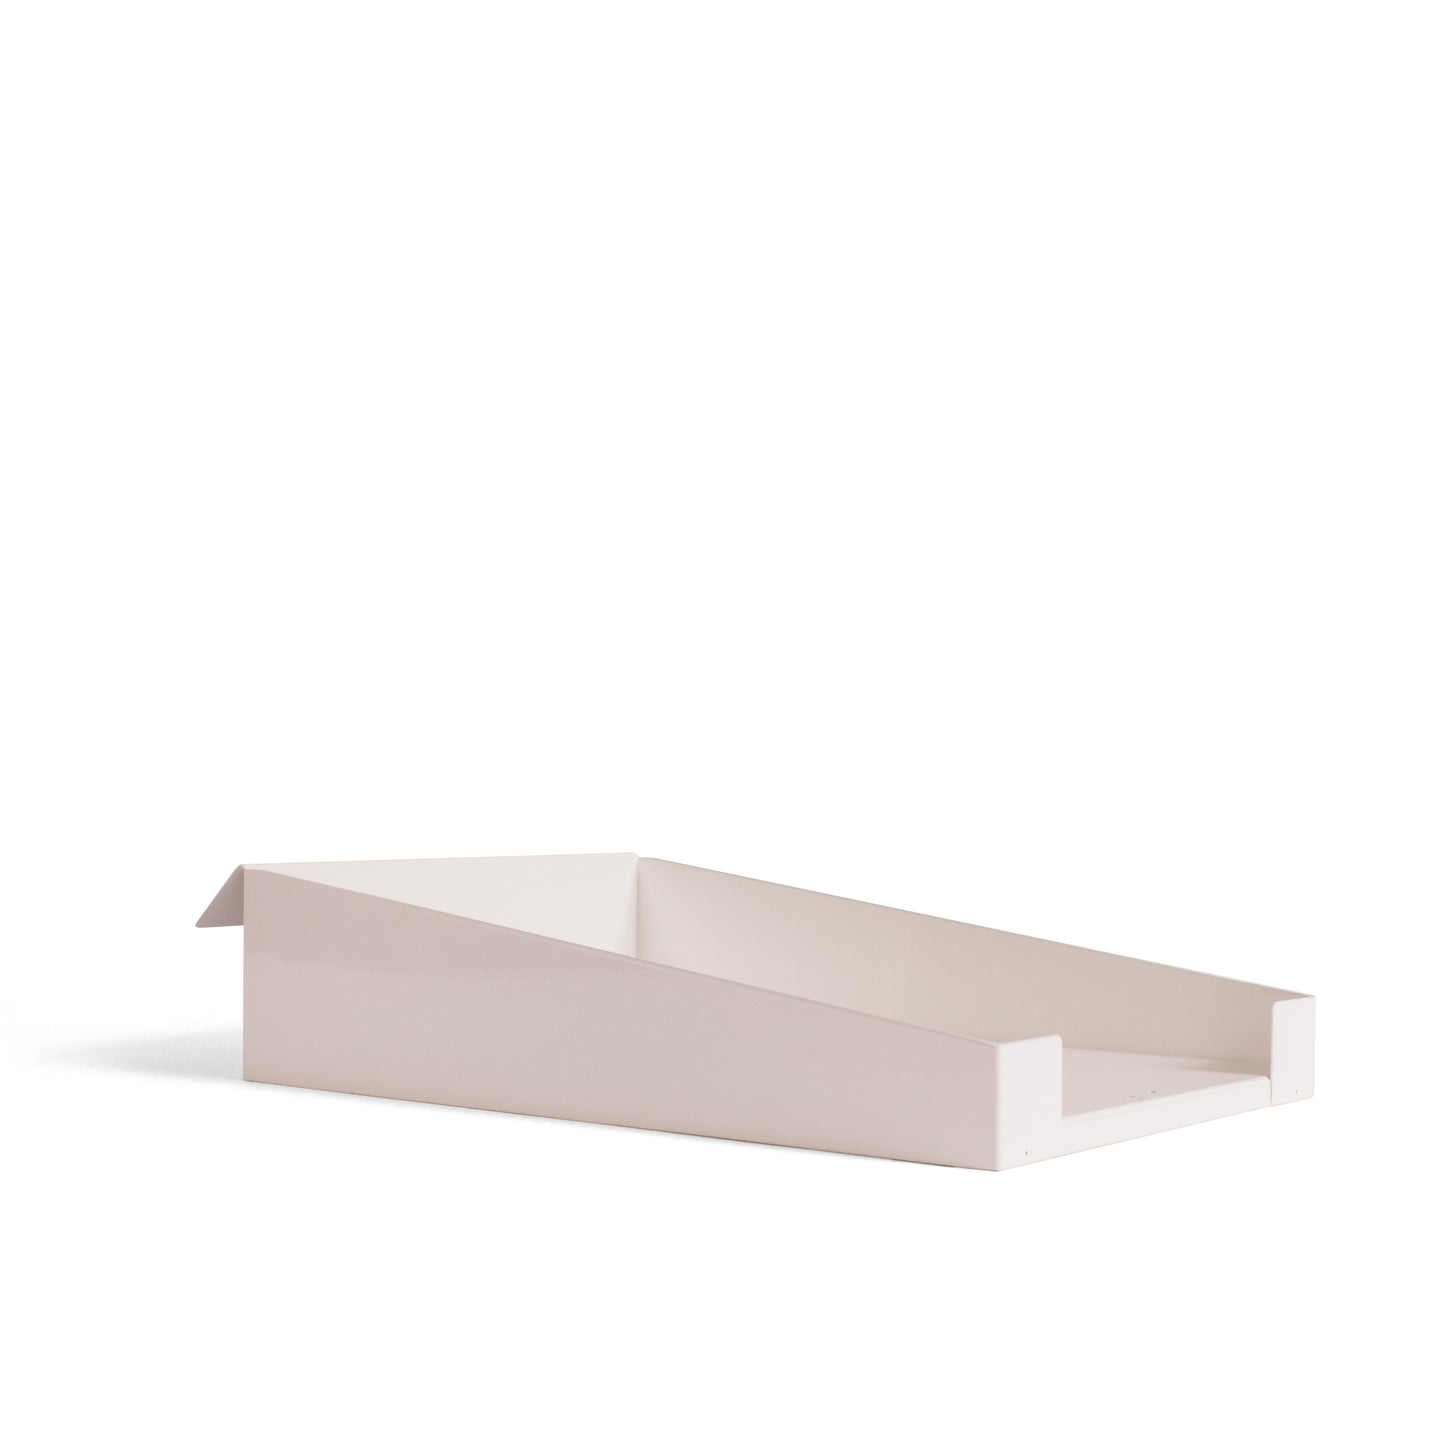 Officers A4 Paper Holder - White